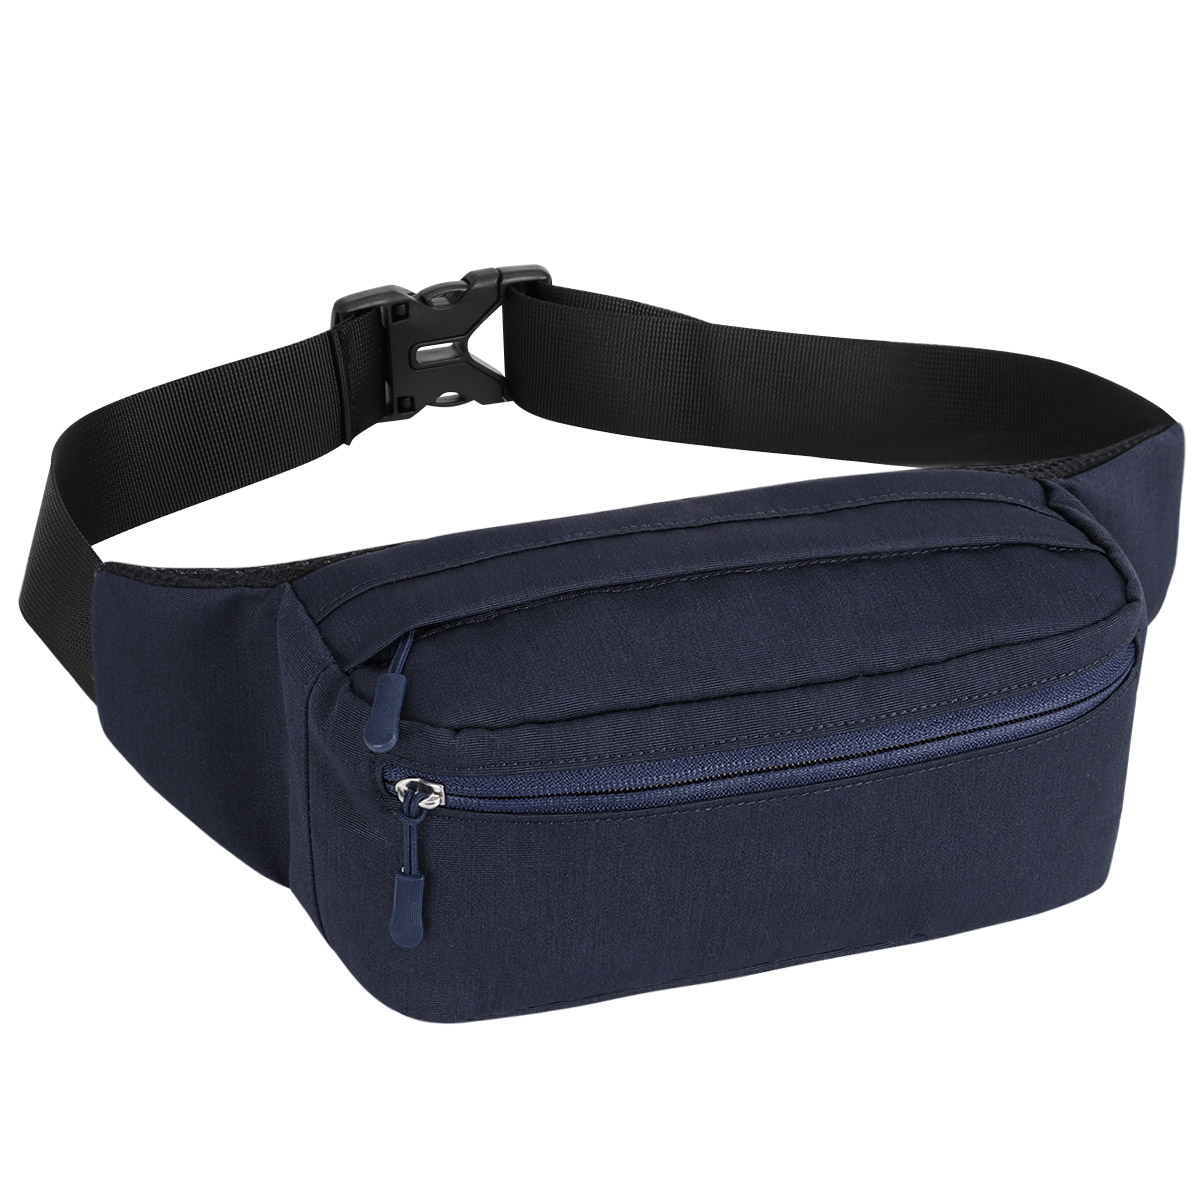 HAWEE Unisex Fanny Pack-Crossbody Sling Backpack Running Waist Pack Belt Hip Bag for Travel Sport Hiking Cycling - image 1 of 6